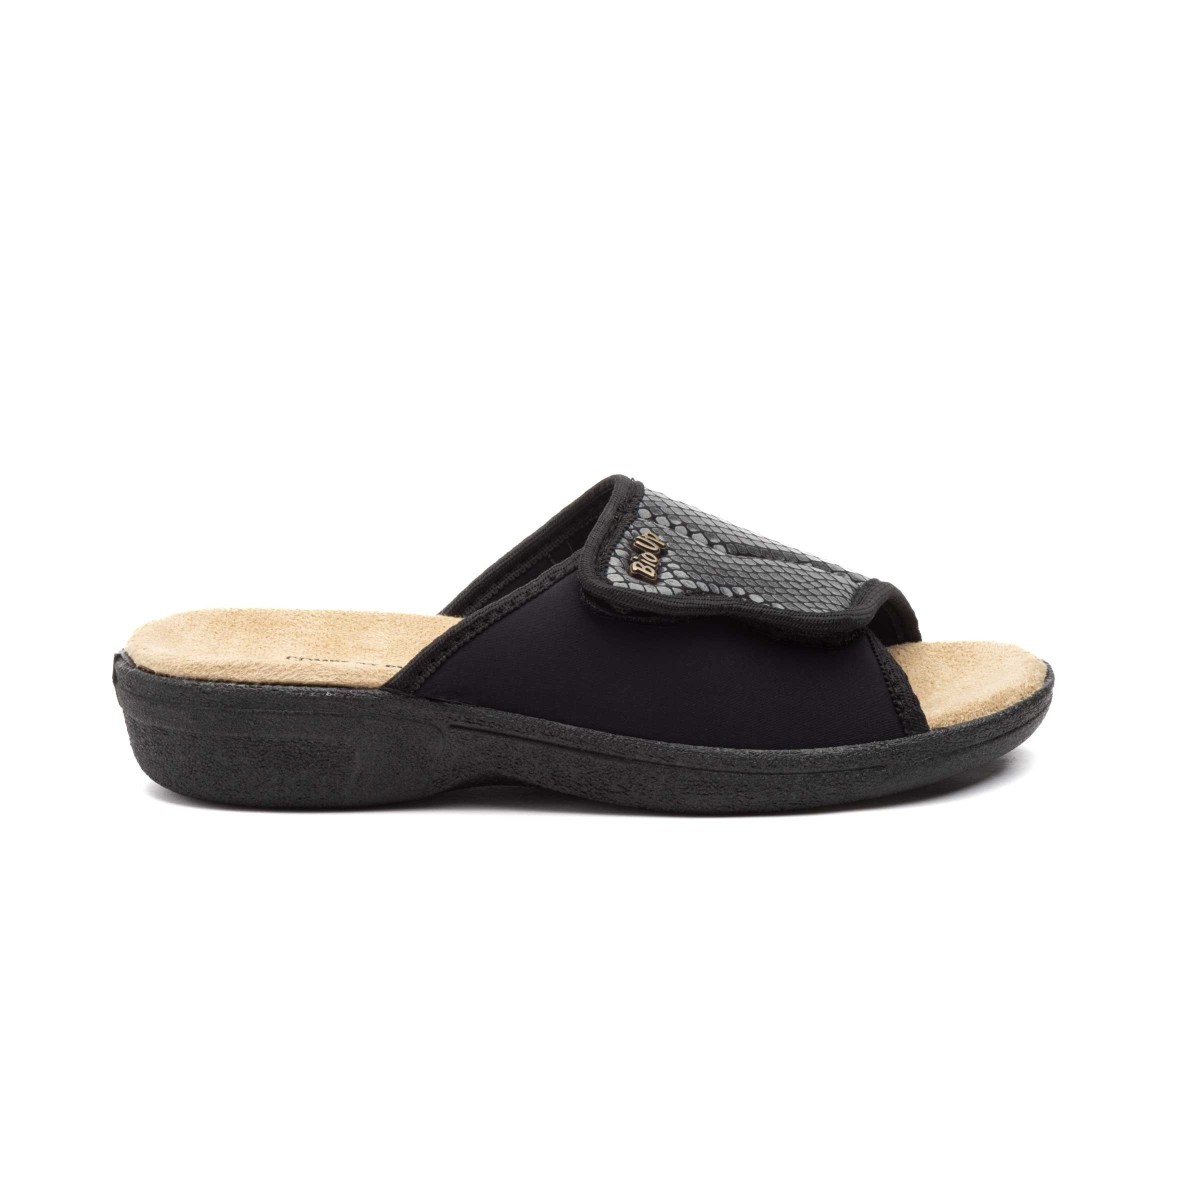 Anatomic Sandals-Clogs by Bio Up Anatomic Lycra Sandals-Clogs for women with adjustable velcro.
